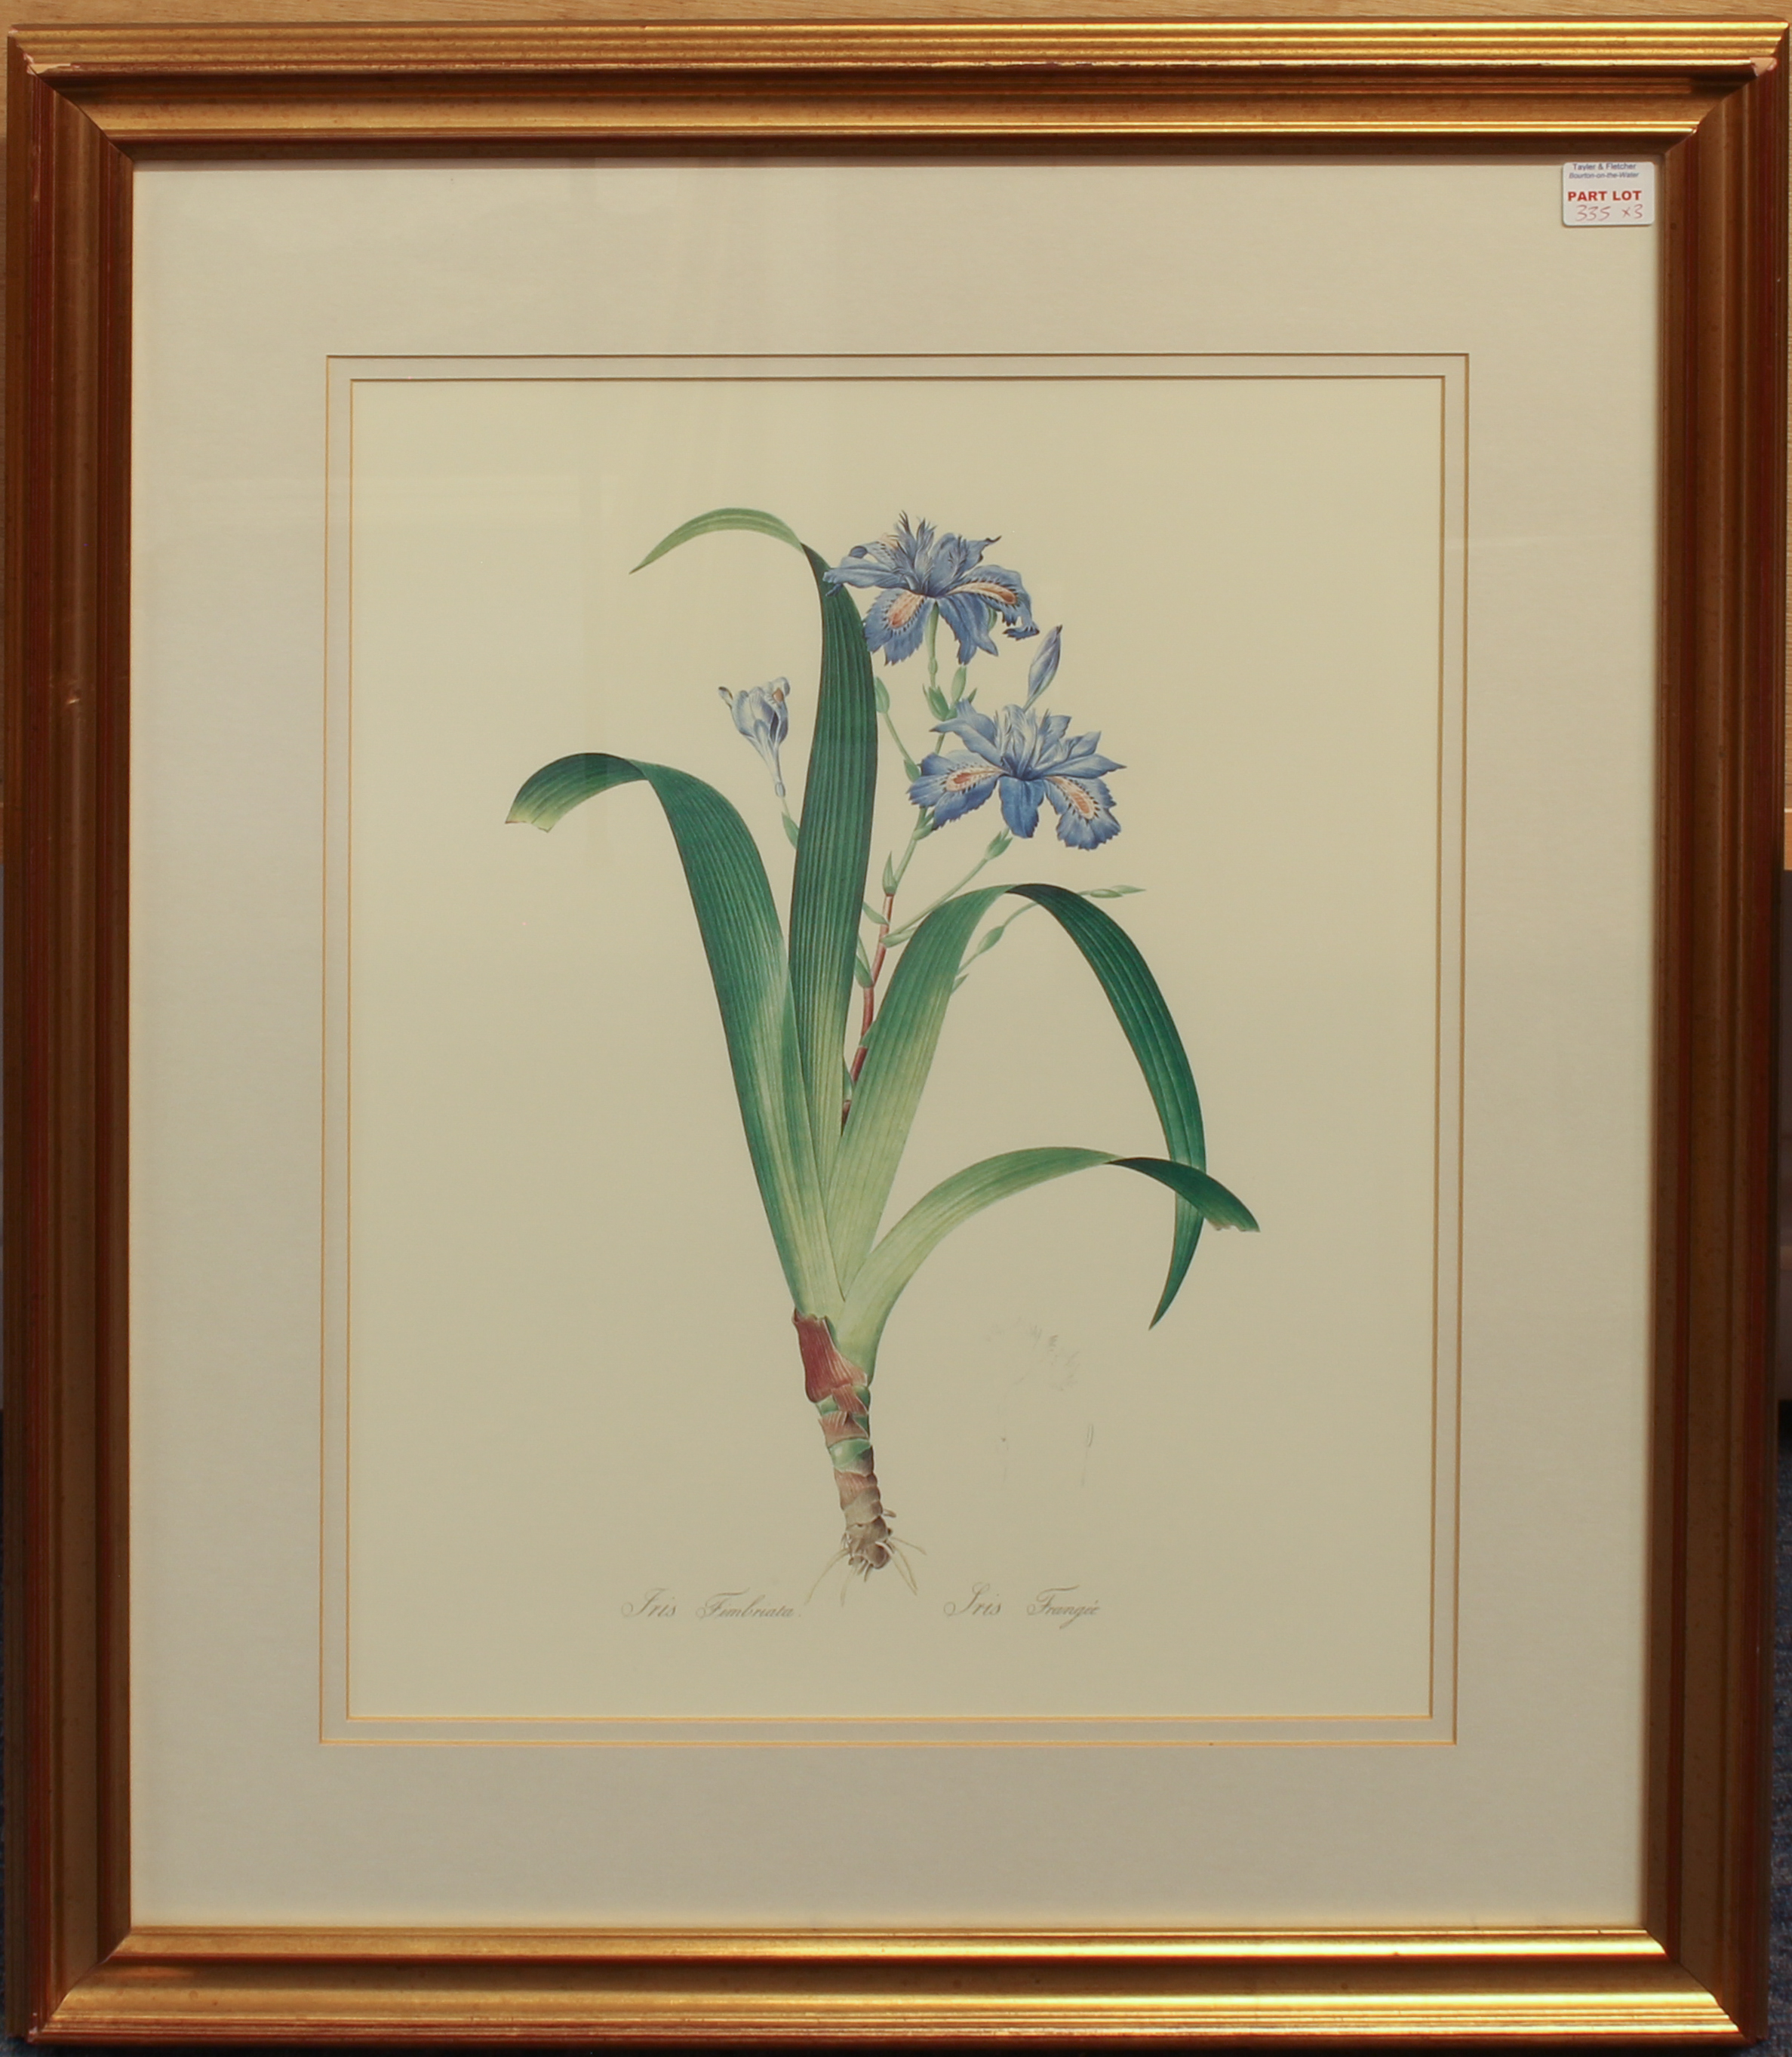 After Christophe Jacob Trew and Pierre Joseph Redoute: a set of three botanical prints - modern - Image 3 of 4